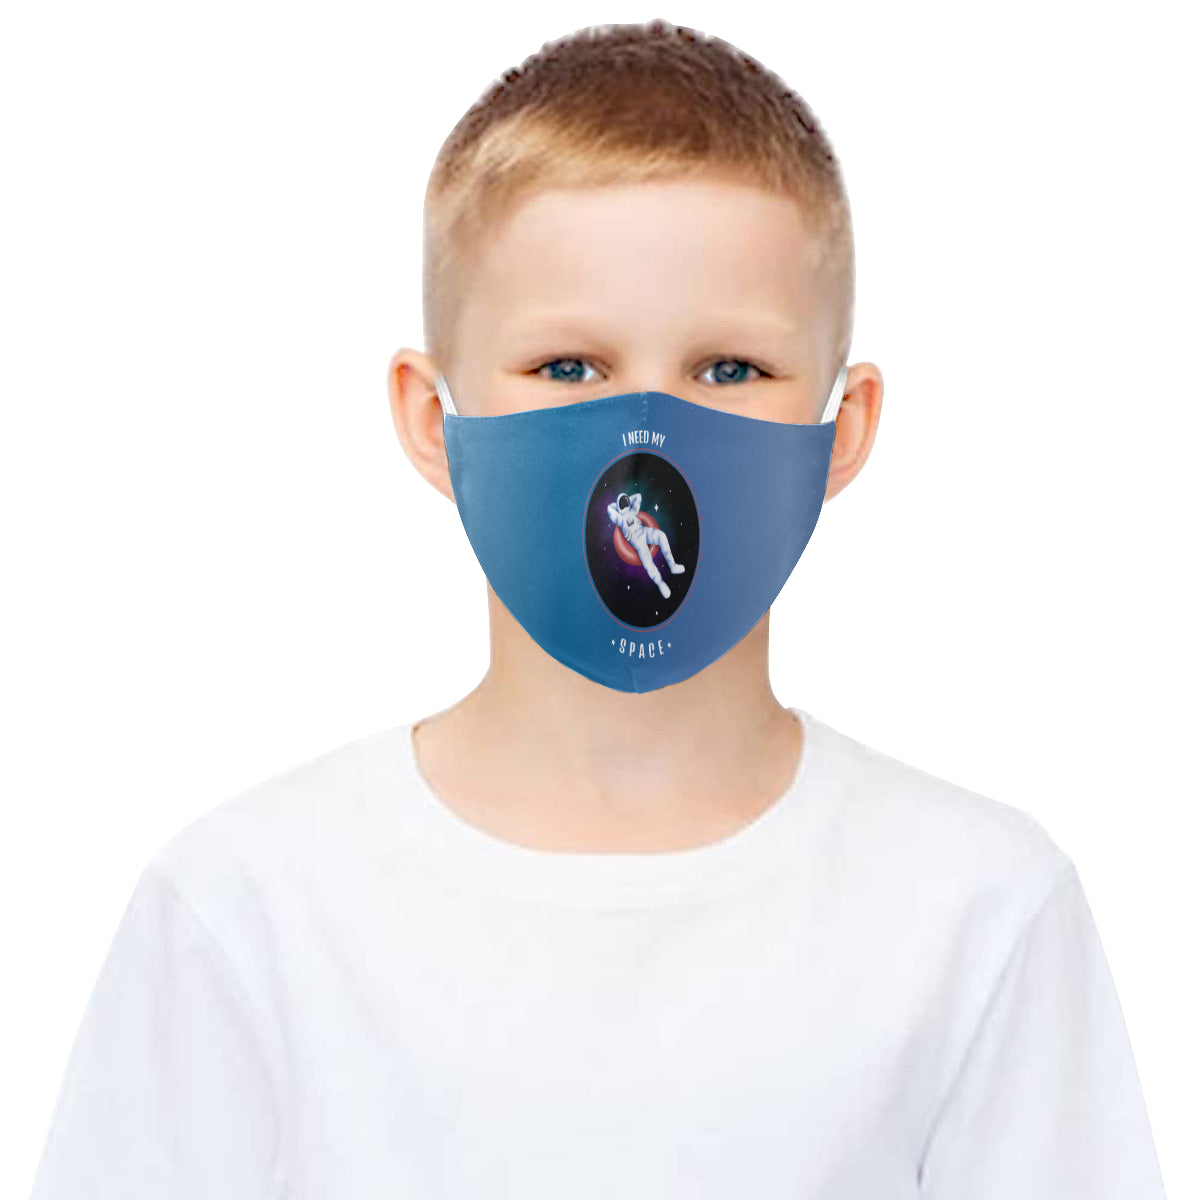 I Need My Space Cotton Fabric Face Mask with Filter Slot & Adjustable Strap (Pack of 5) - Non-medical use